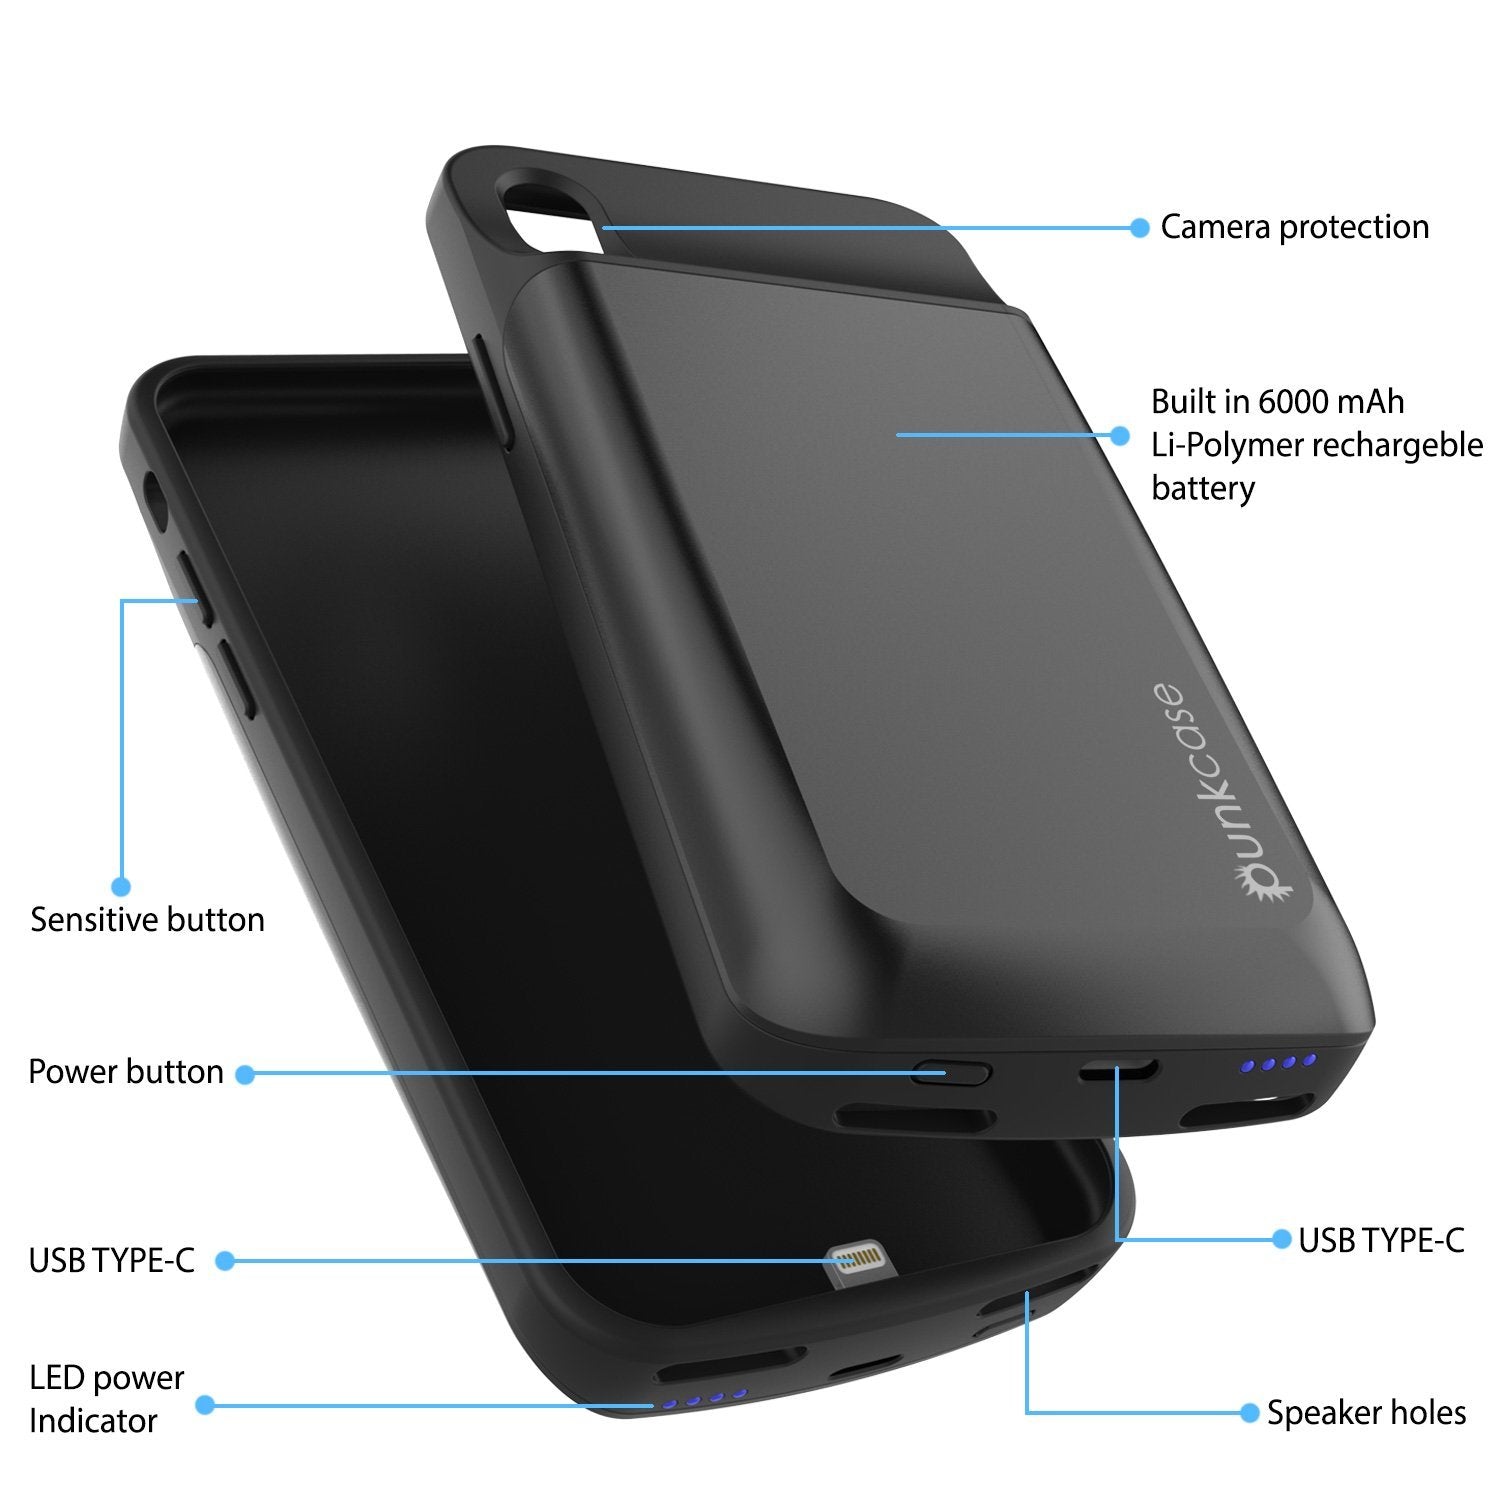 iphone XR Battery Case, PunkJuice 5000mAH Fast Charging Power Bank W/ Screen Protector | [Black] - PunkCase NZ